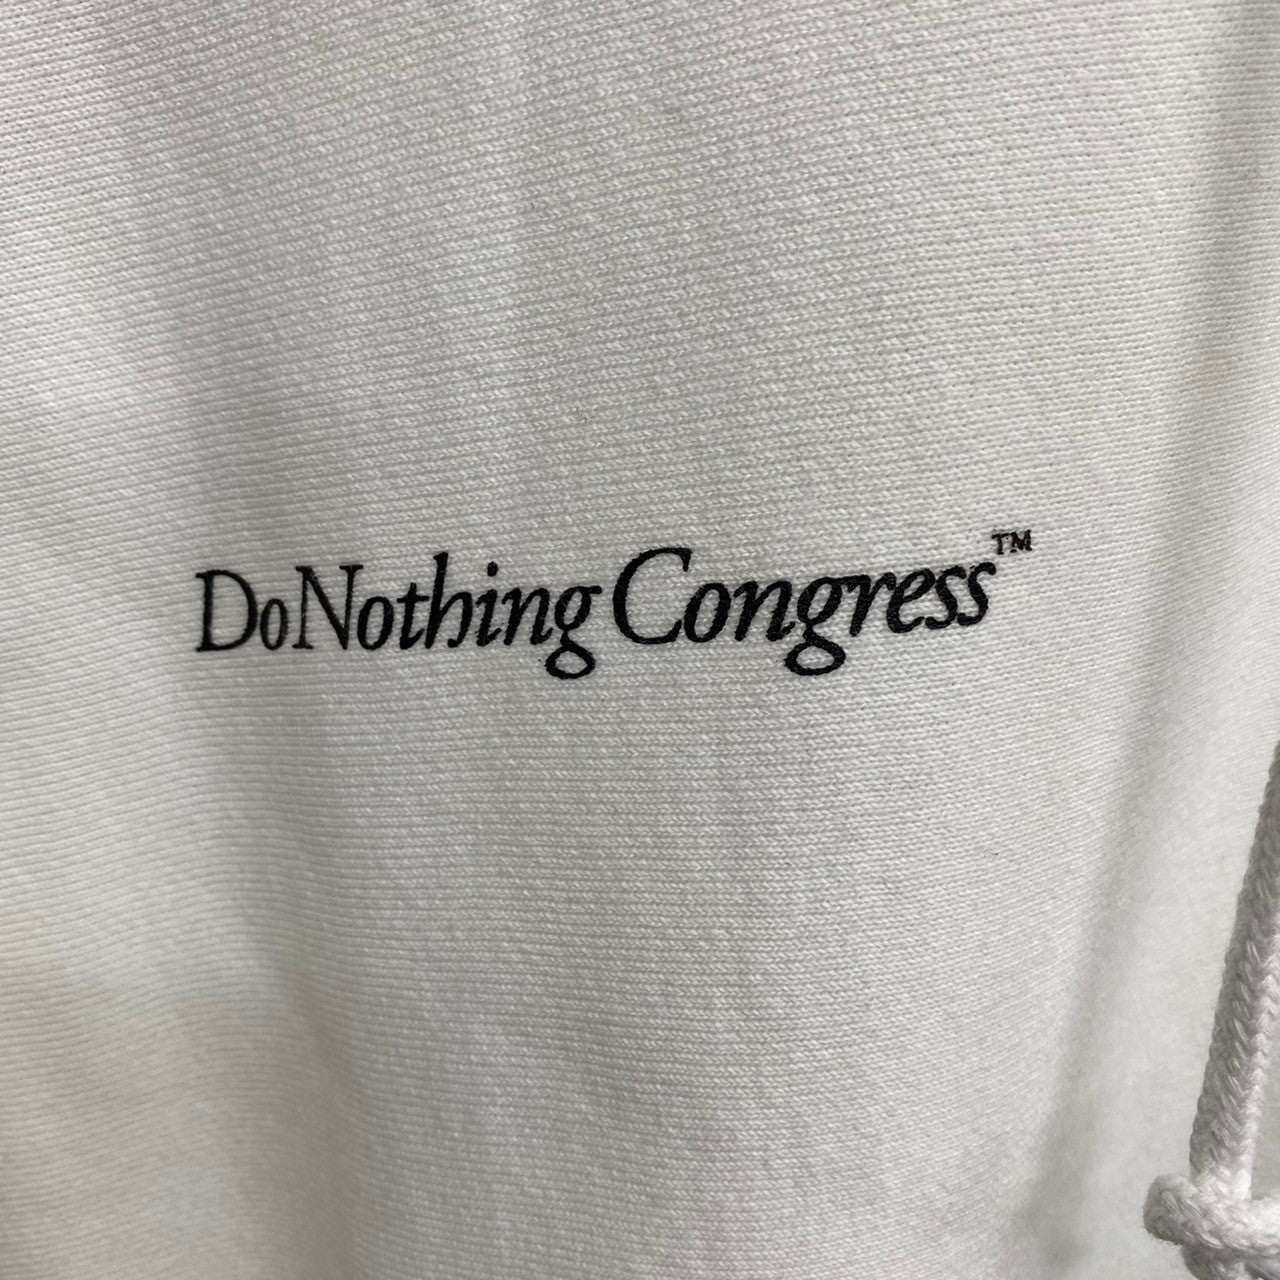 [ FINAL ONE ! ] Do Nothing Congress PULL OVER HOODIE  " The Opium of The People " / Do Nothing Congress